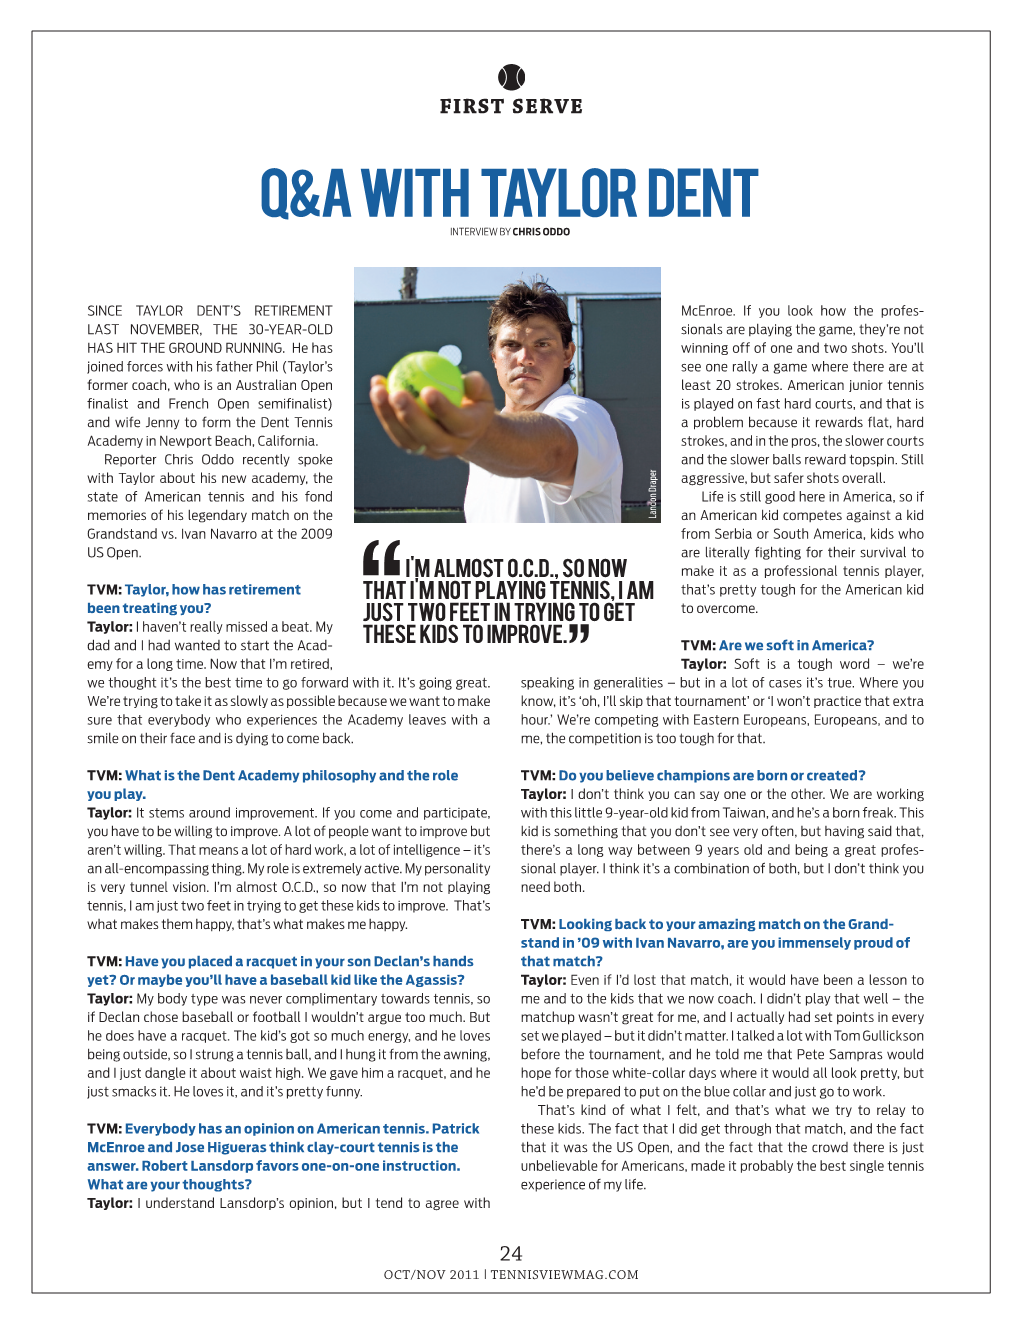 Taylor Dent Interview by Chris Oddo